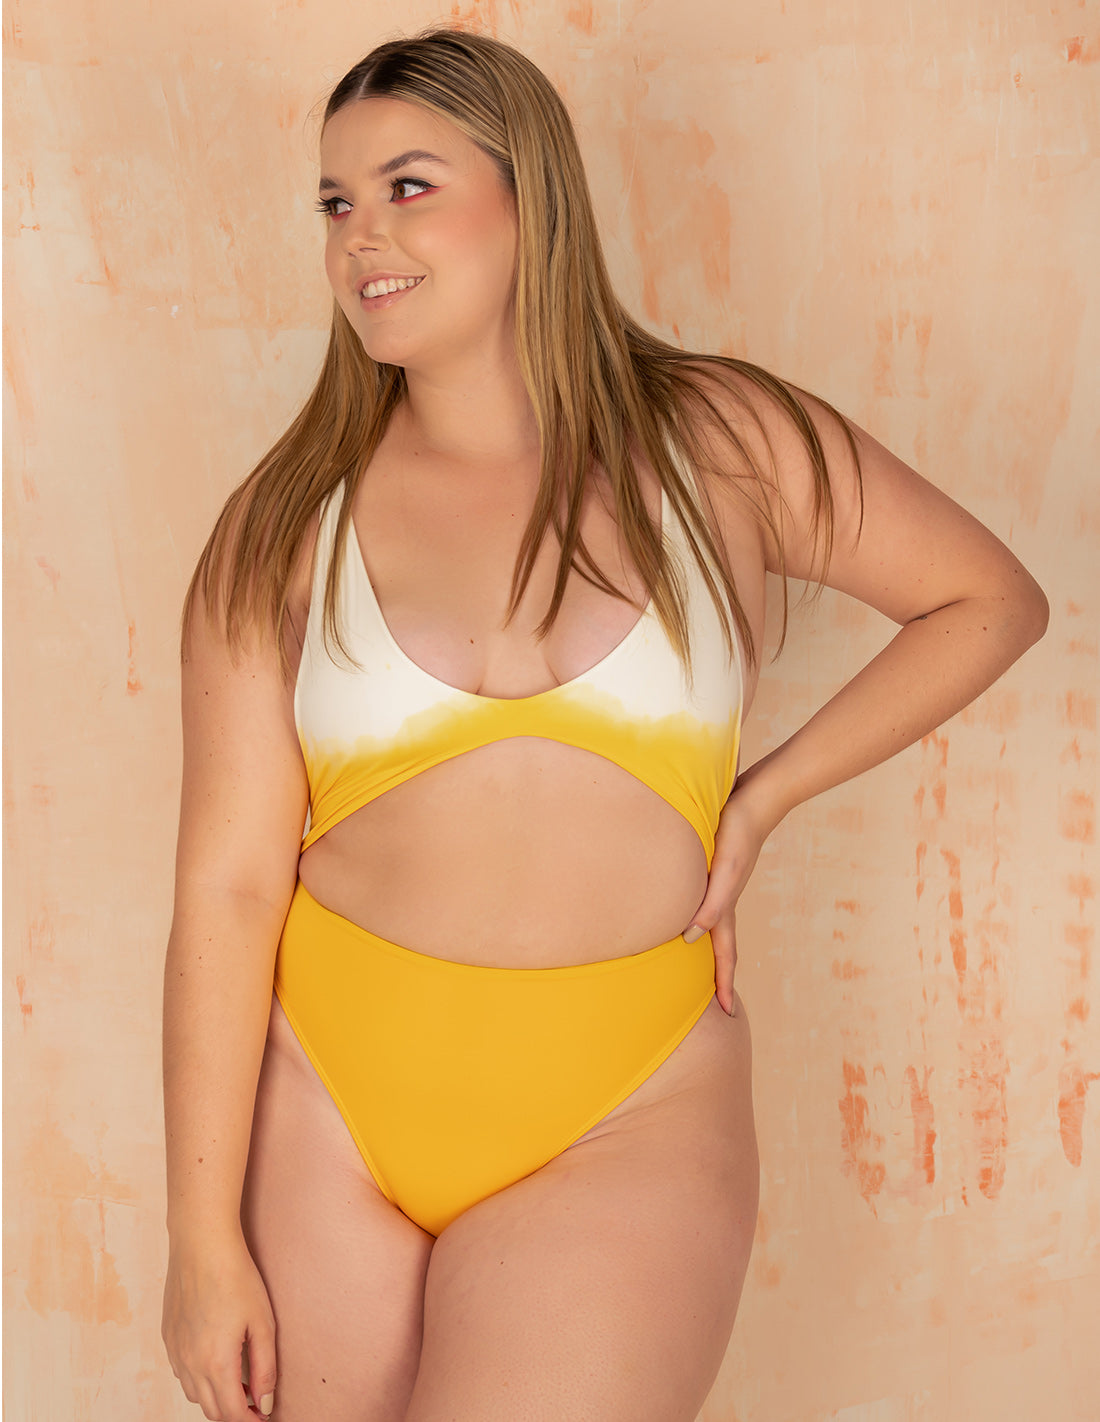 Mirror One-Piece Ivory + Yellow + Gold Yellow. Hand-Dyed One-Piece Swimsuit With Hand Woven Macramé In Ivory + Yellow + Gold Yellow. Entreaguas